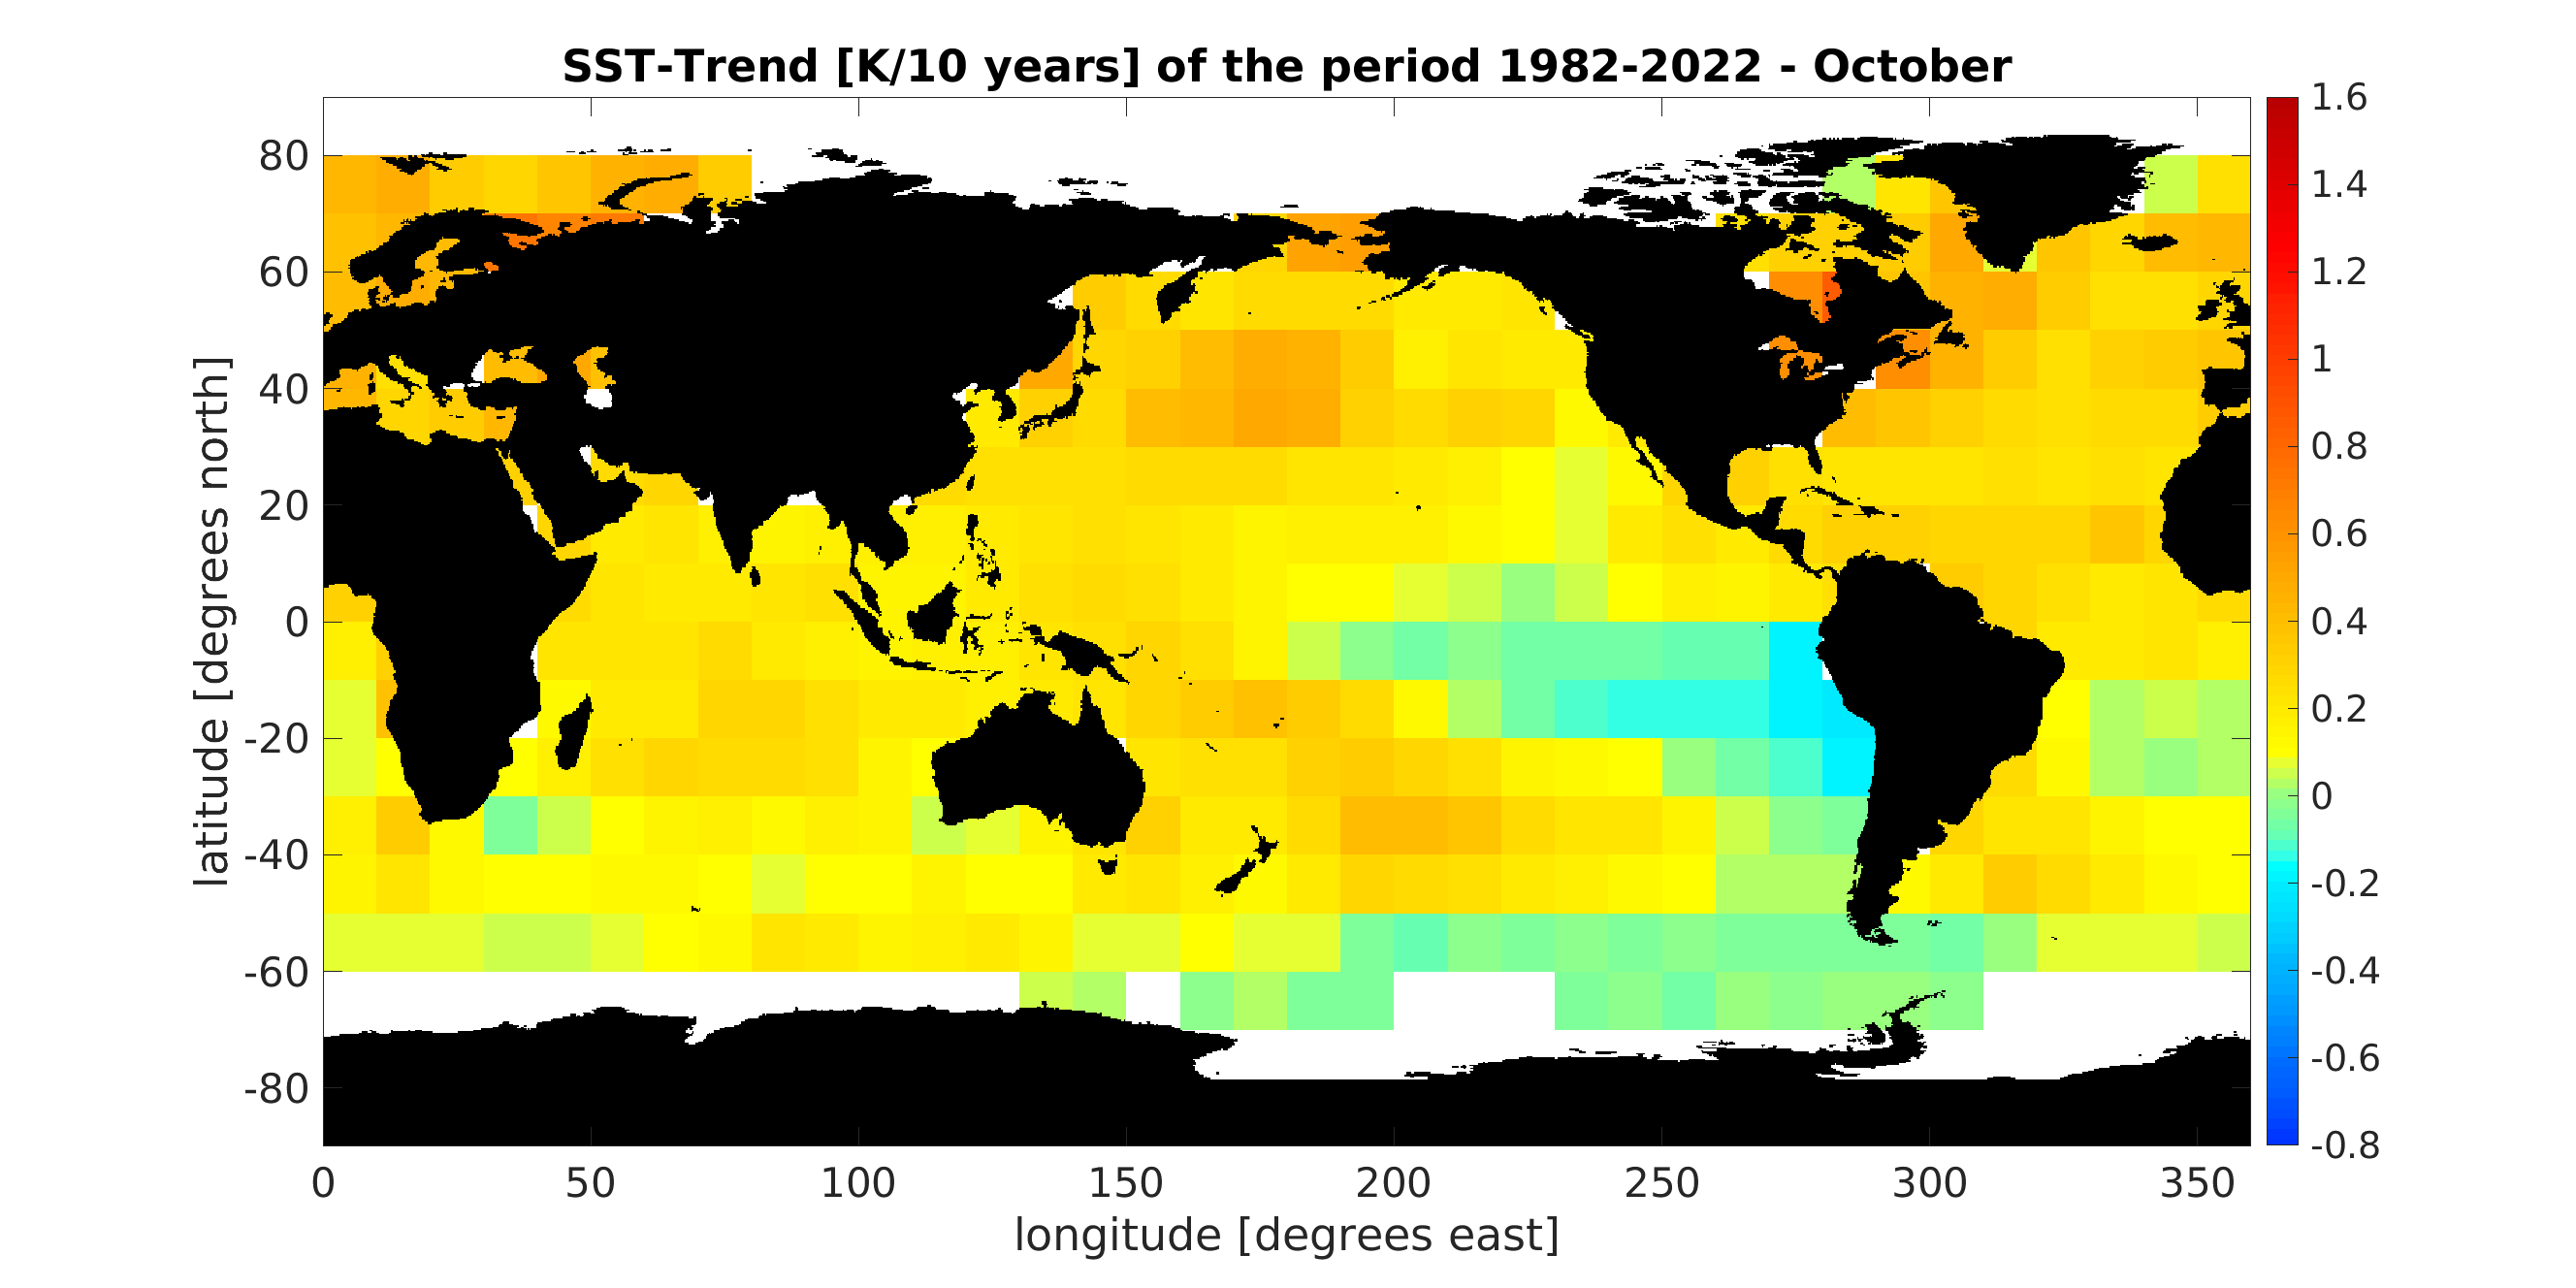 Maps of the SST trend for each month for the period 1982-2020 OCT